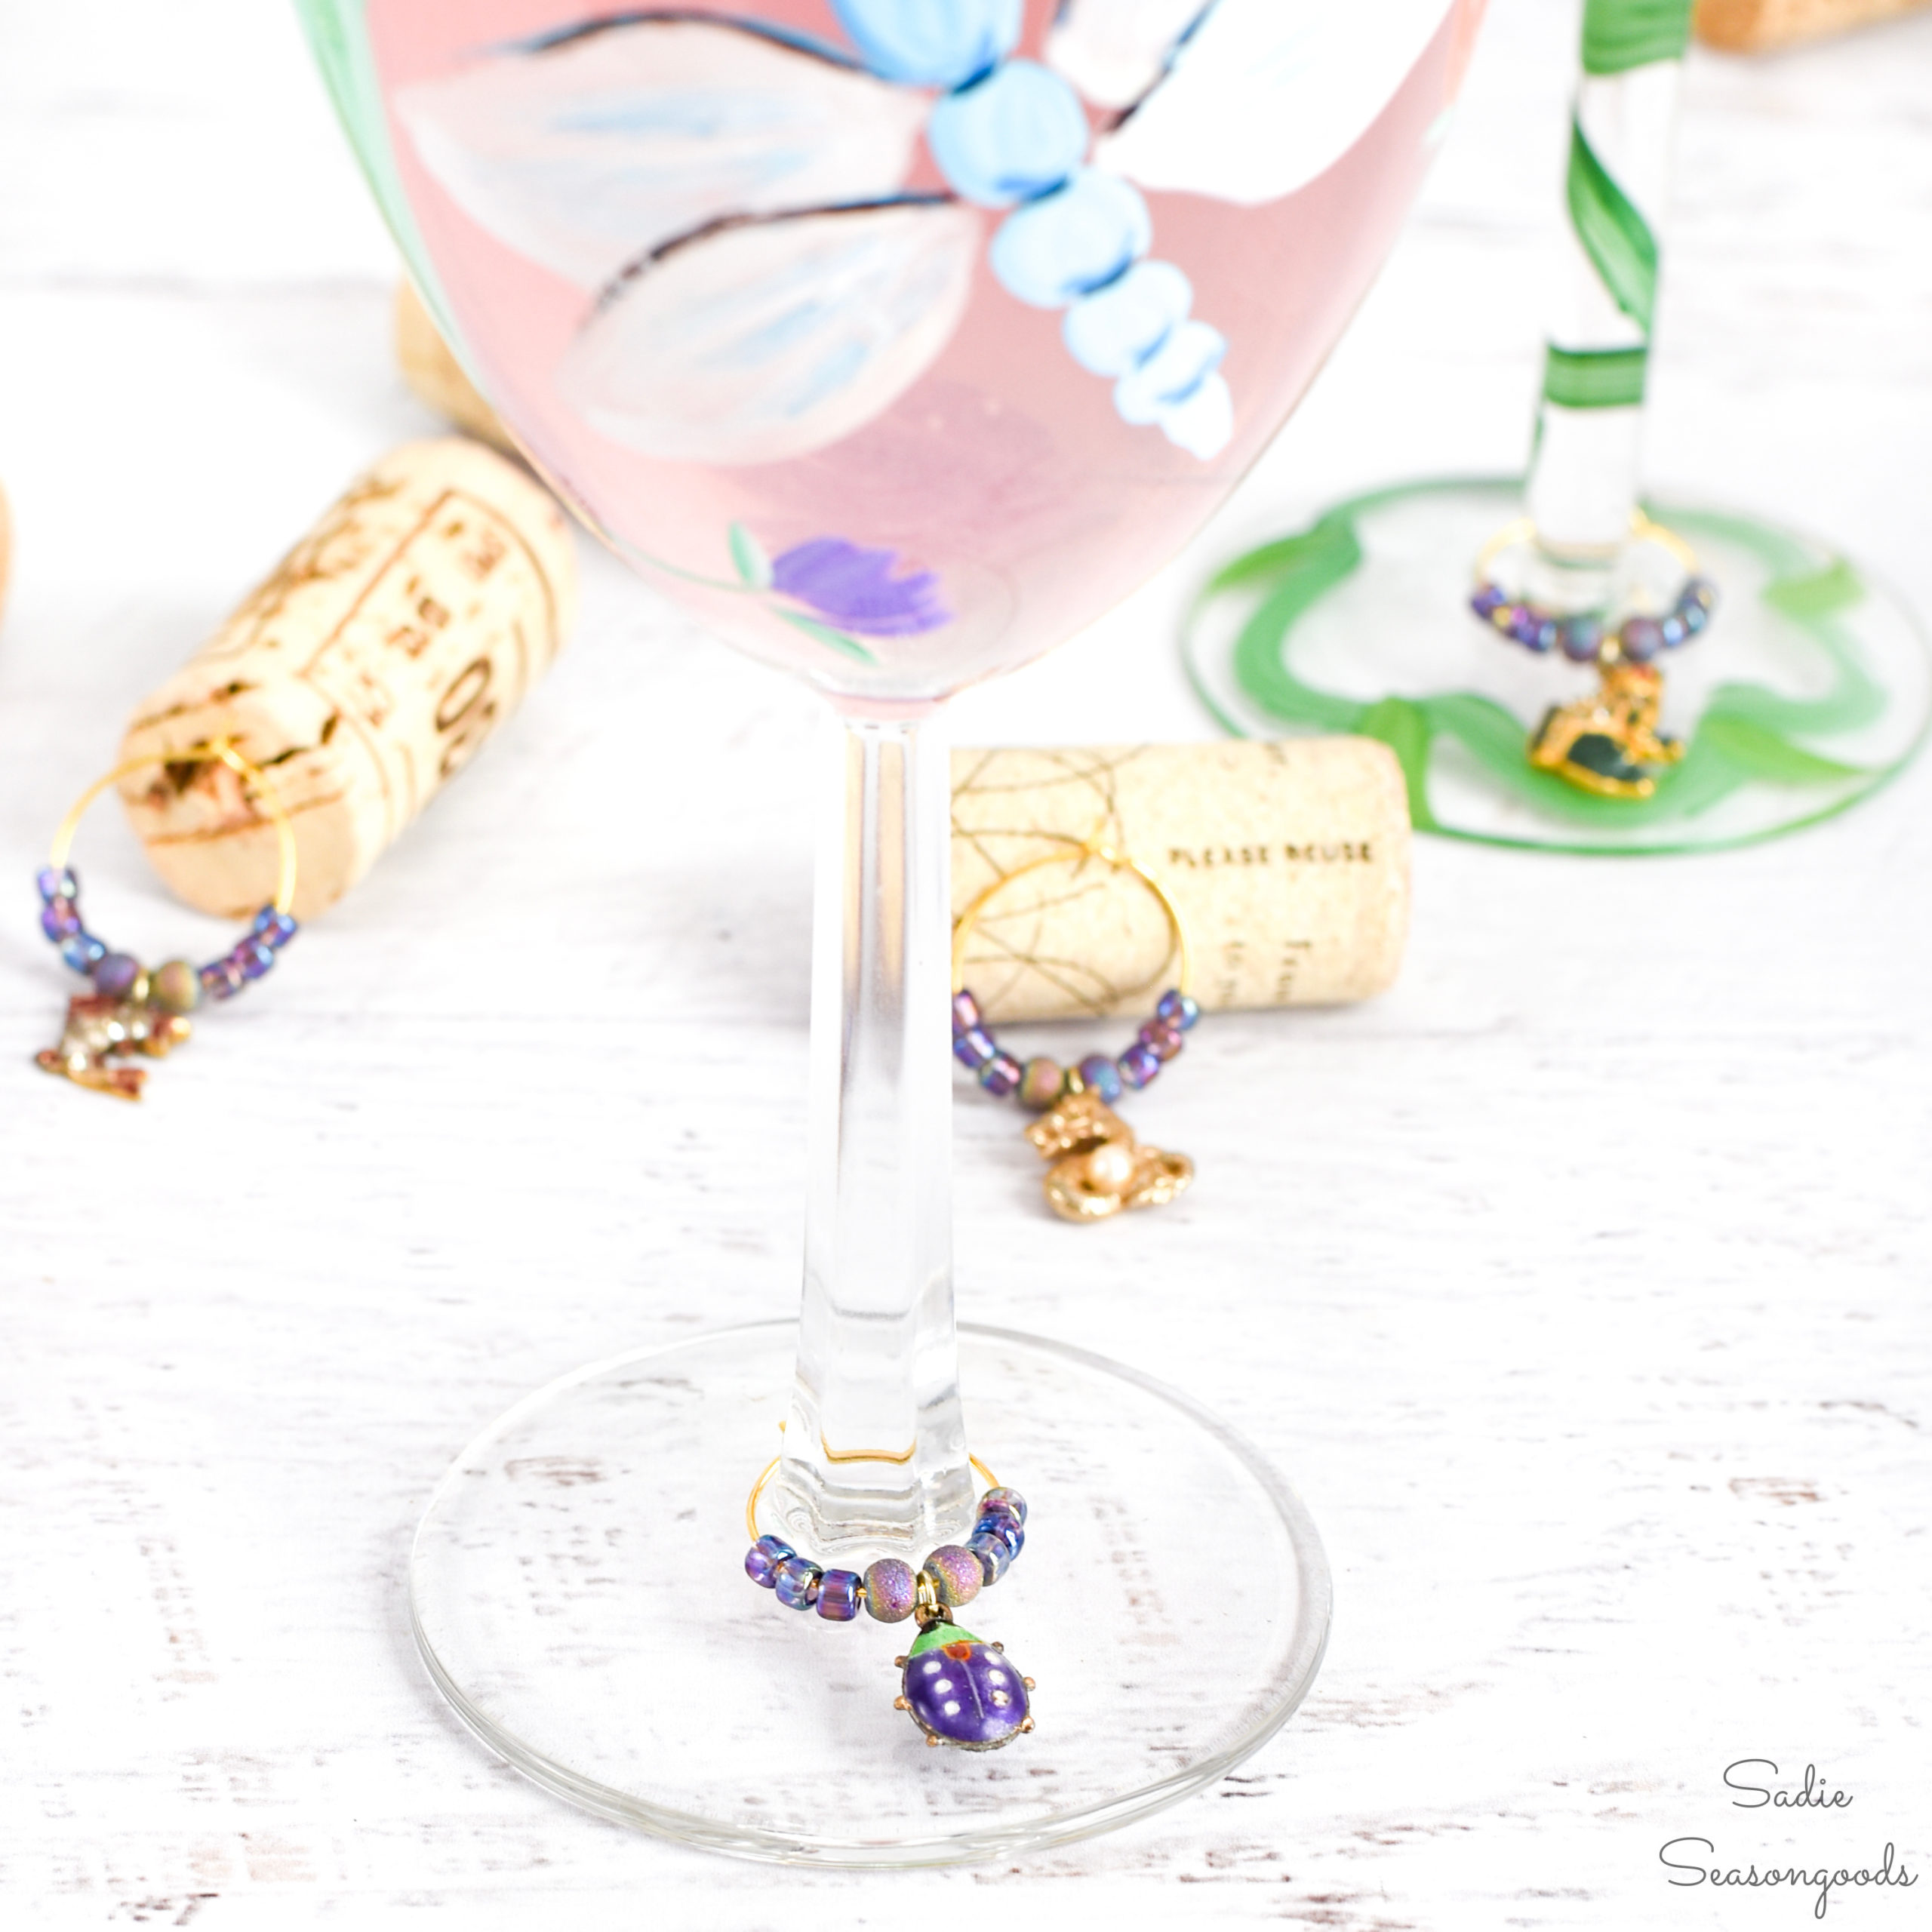 Upcycling Jewelry as Wine Glass Charms for a Fun Craft Project!